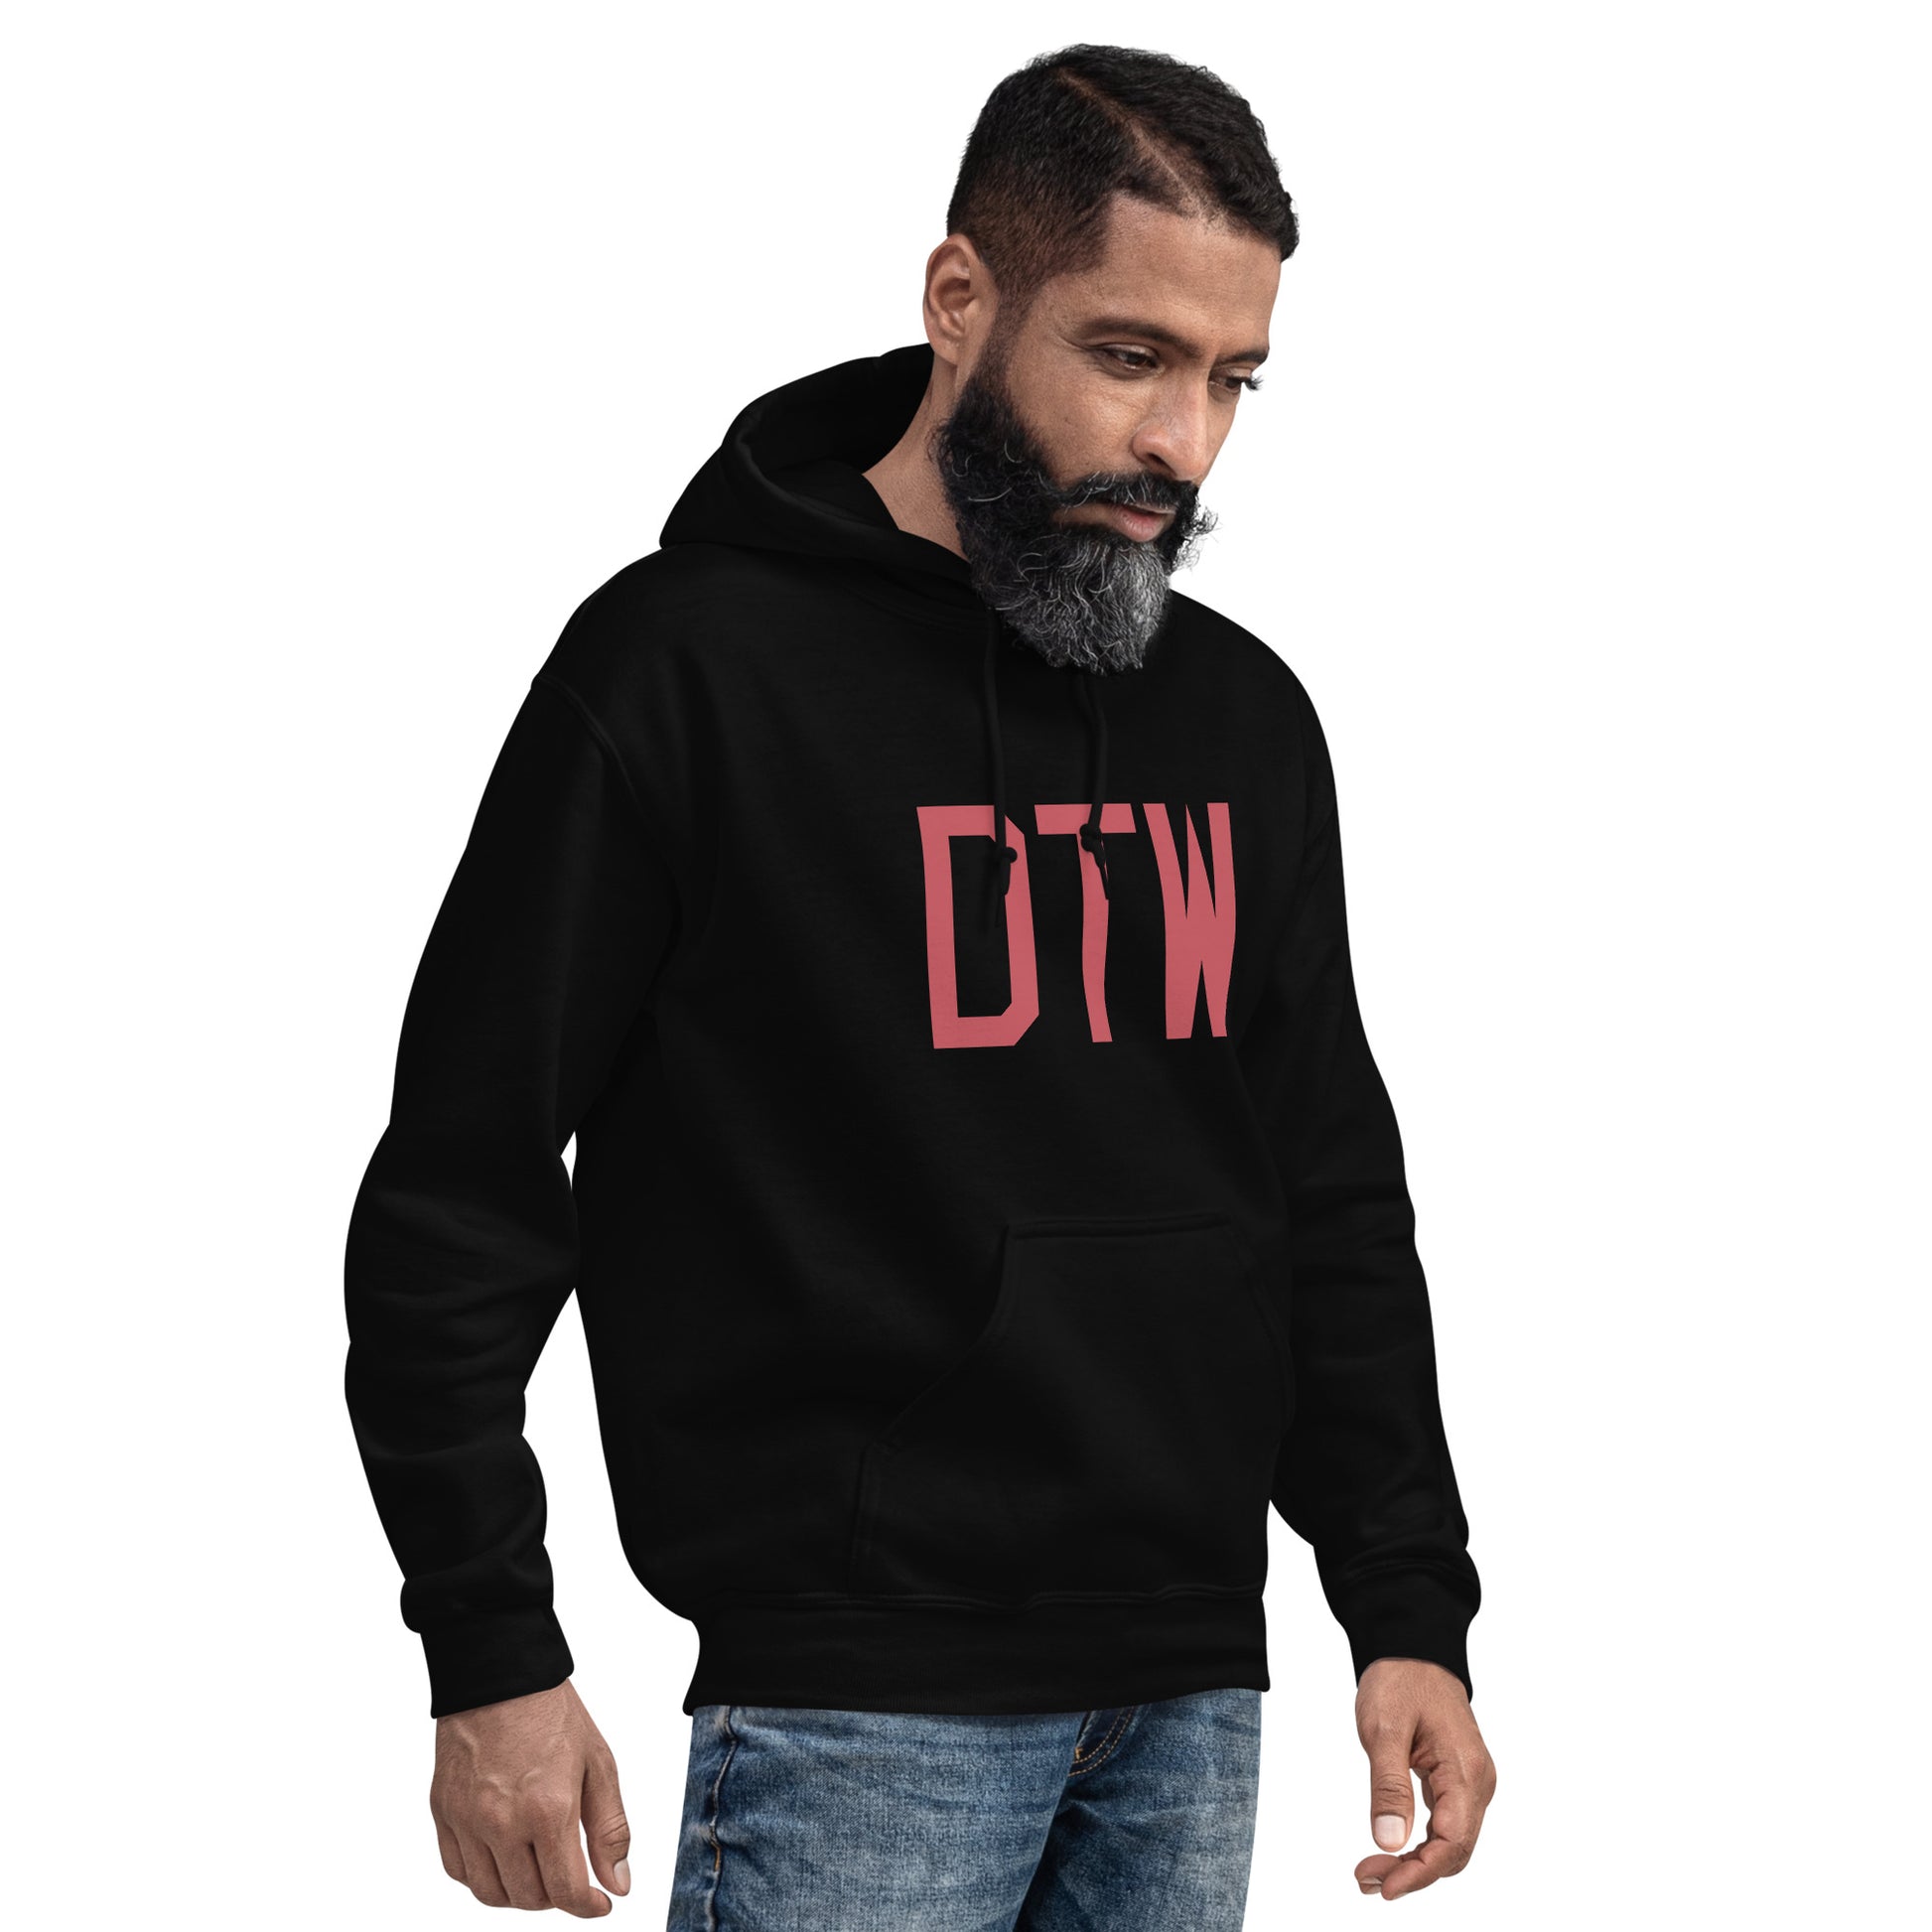 Aviation Enthusiast Hoodie - Deep Pink Graphic • DTW Detroit • YHM Designs - Image 06